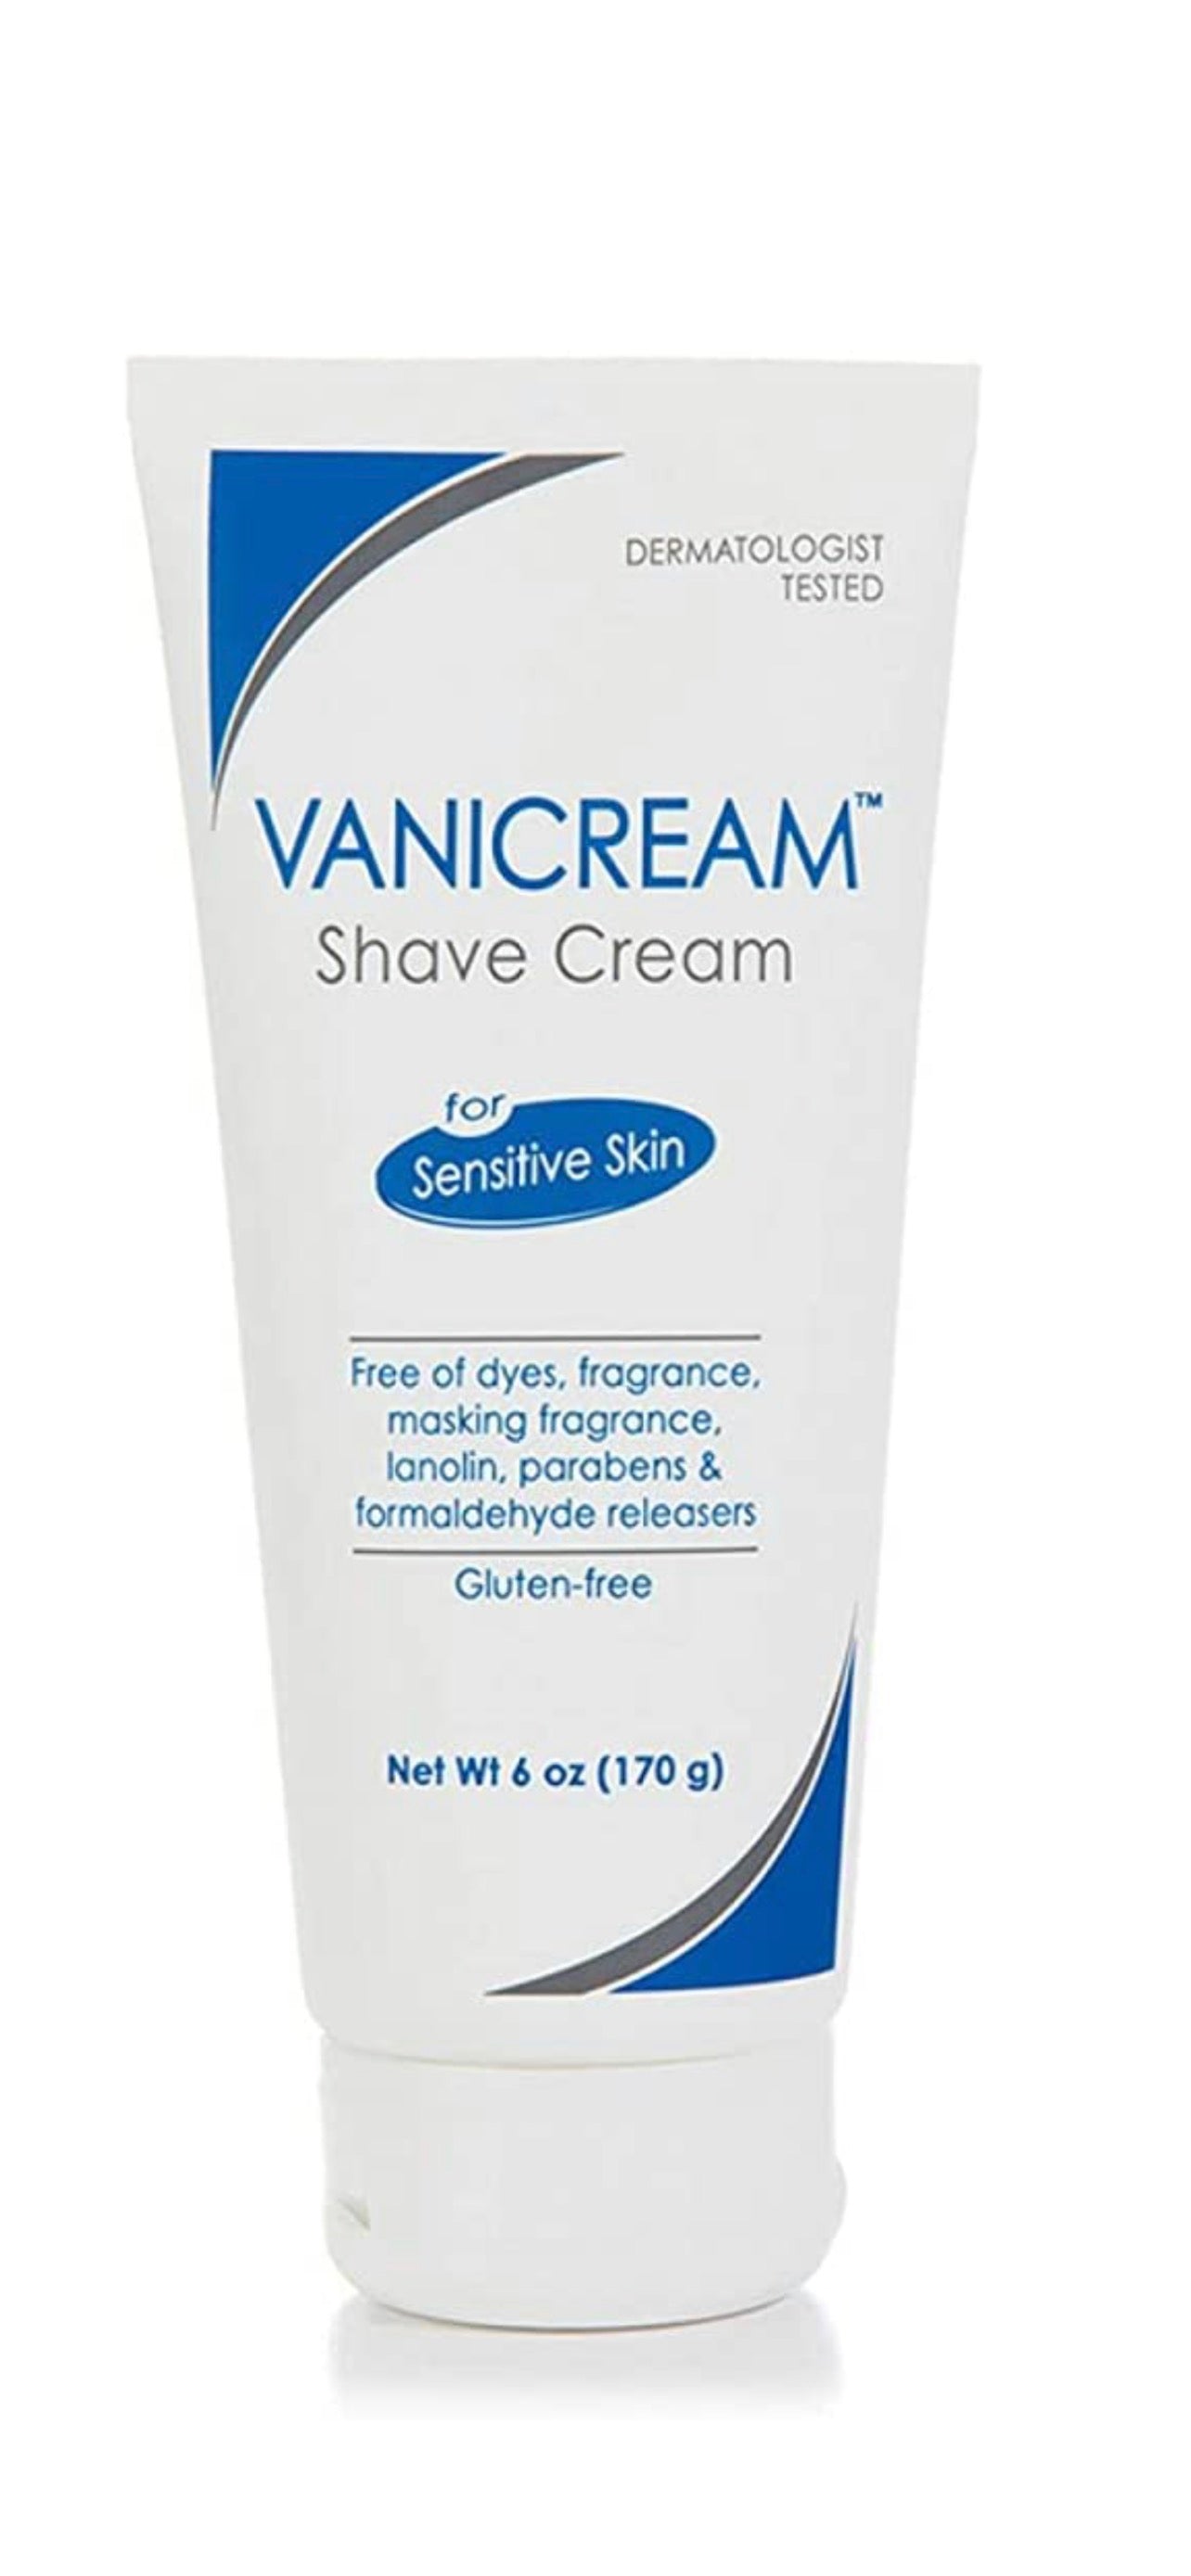 Vanicream SHAVE CREAM for SENSITIVE SKIN / Fragrance and Gluten Free / 6 Ounce - Supporting ORCRF.org